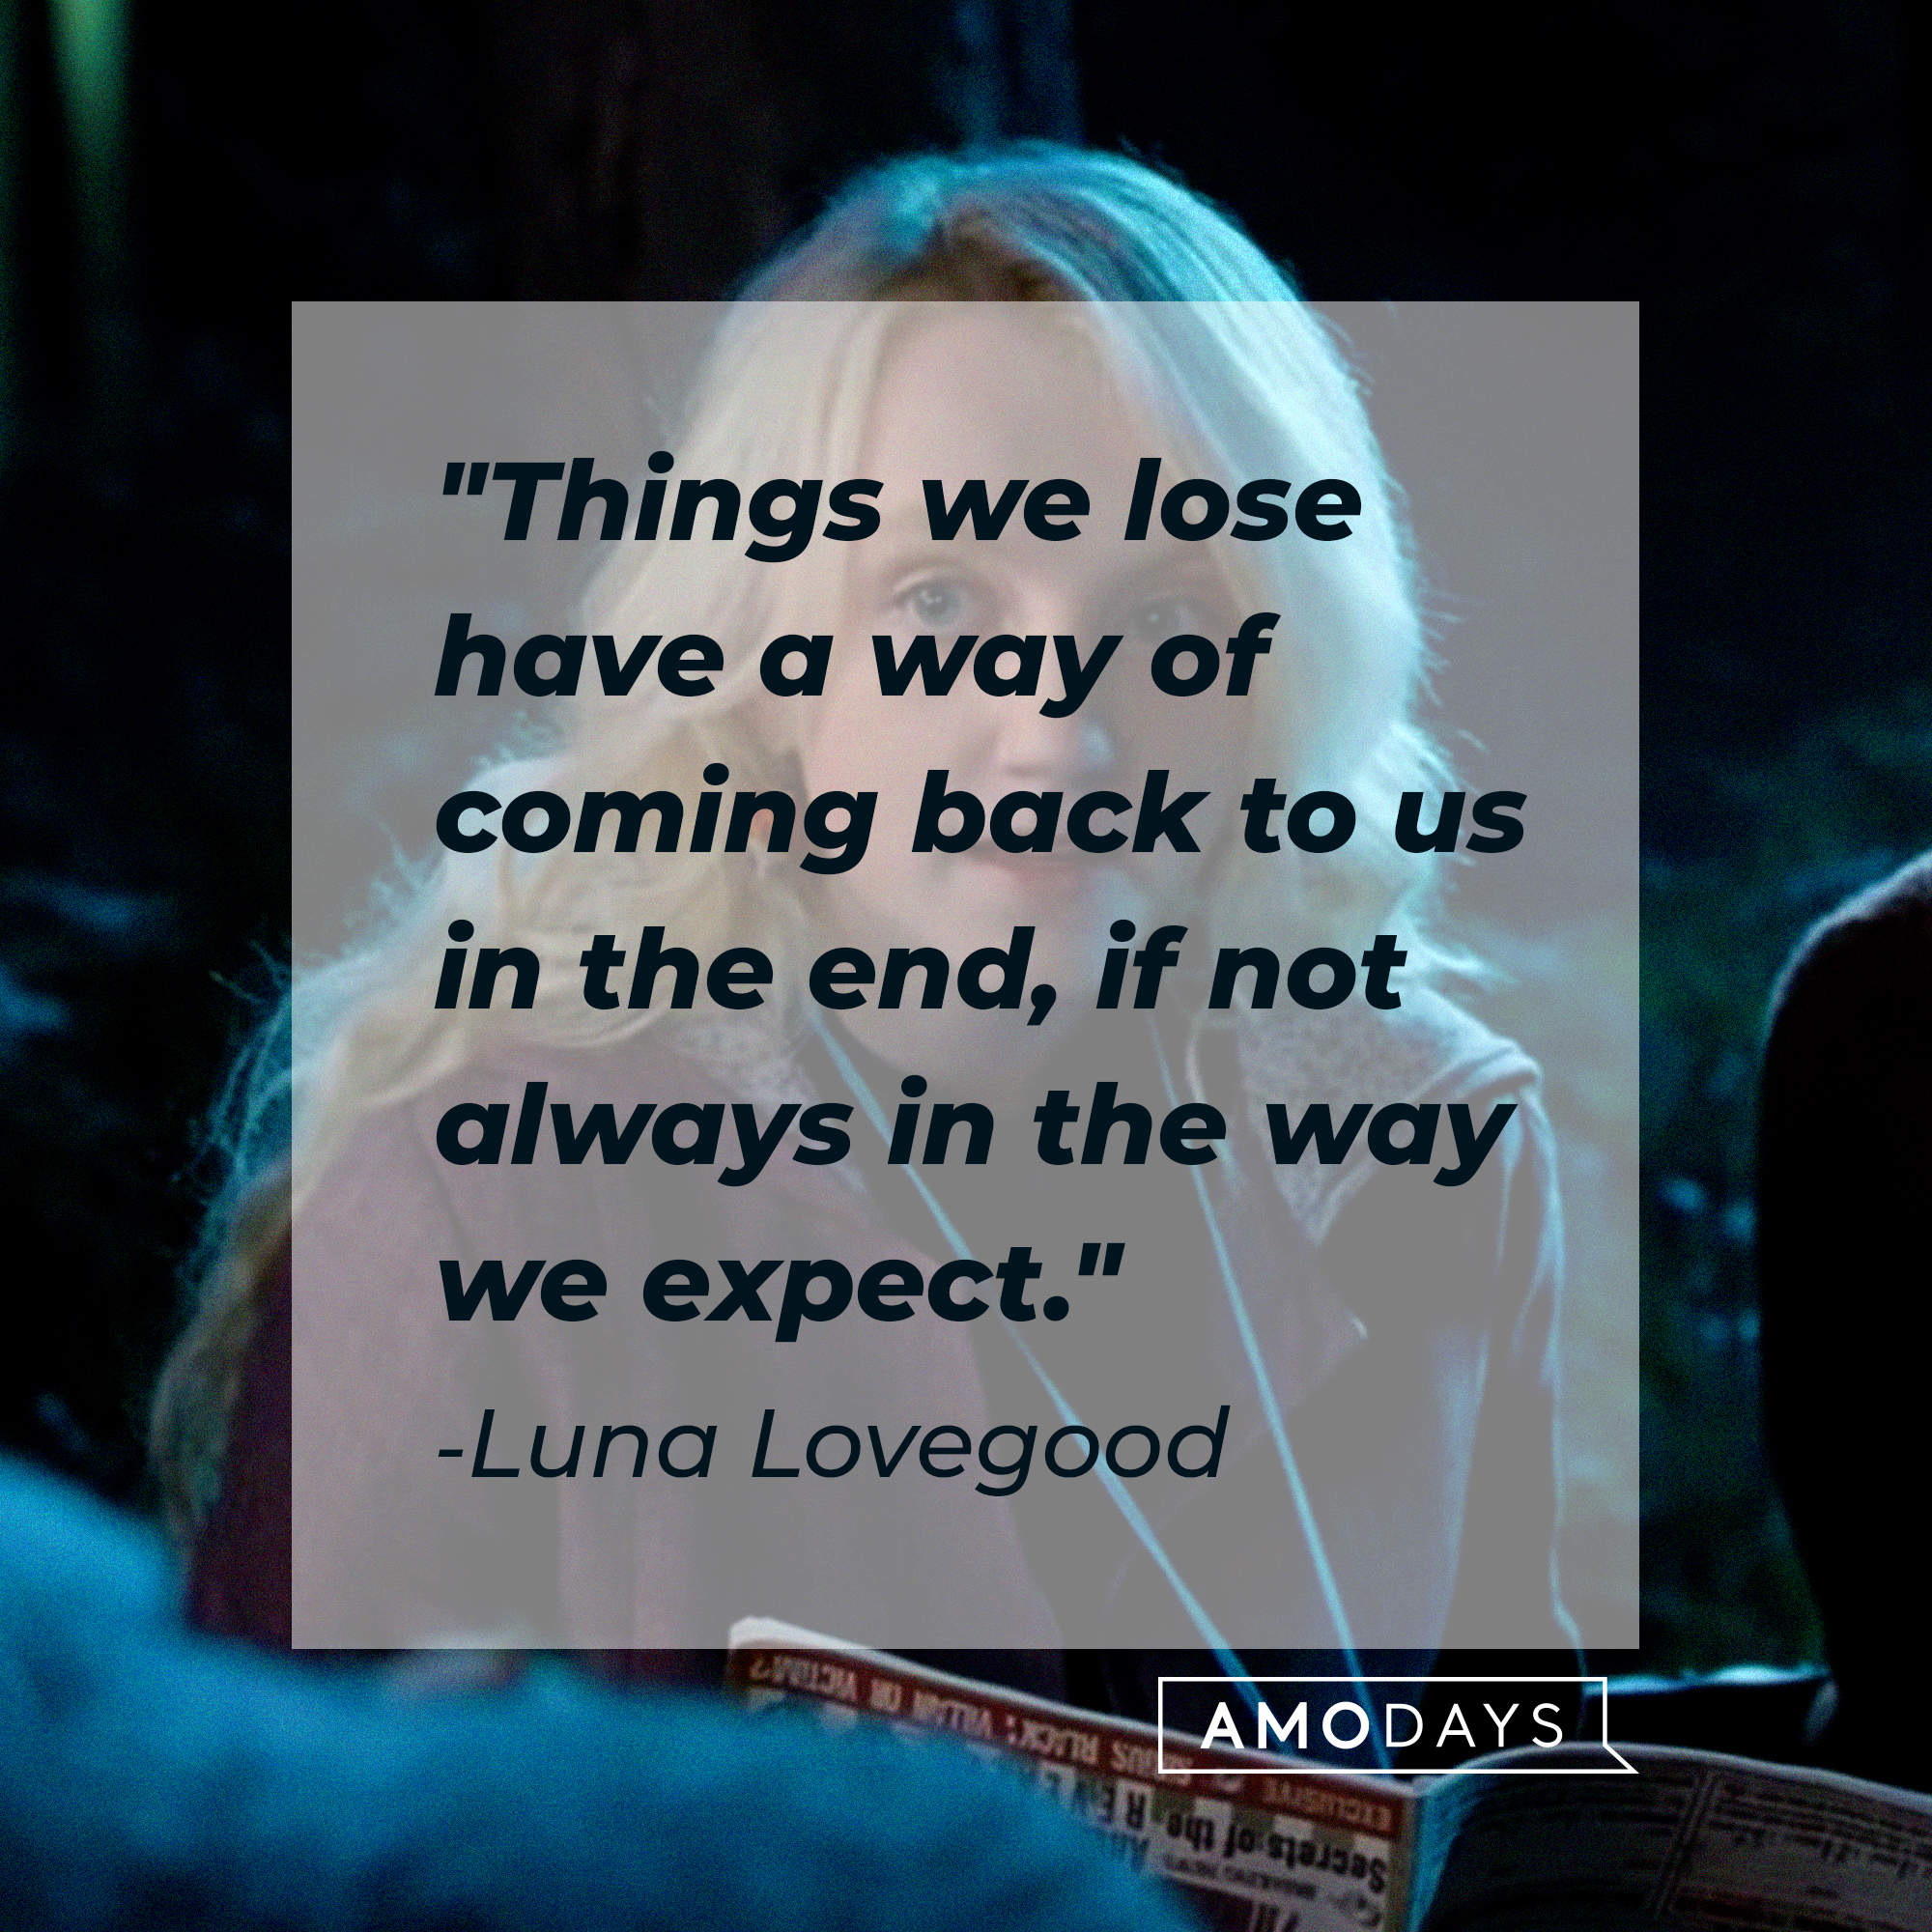 A photo of Luna Lovegood with the quote, "Things we lose have a way of coming back to us in the end, if not always in the way we expect." | Source: YouTube/harrypotter